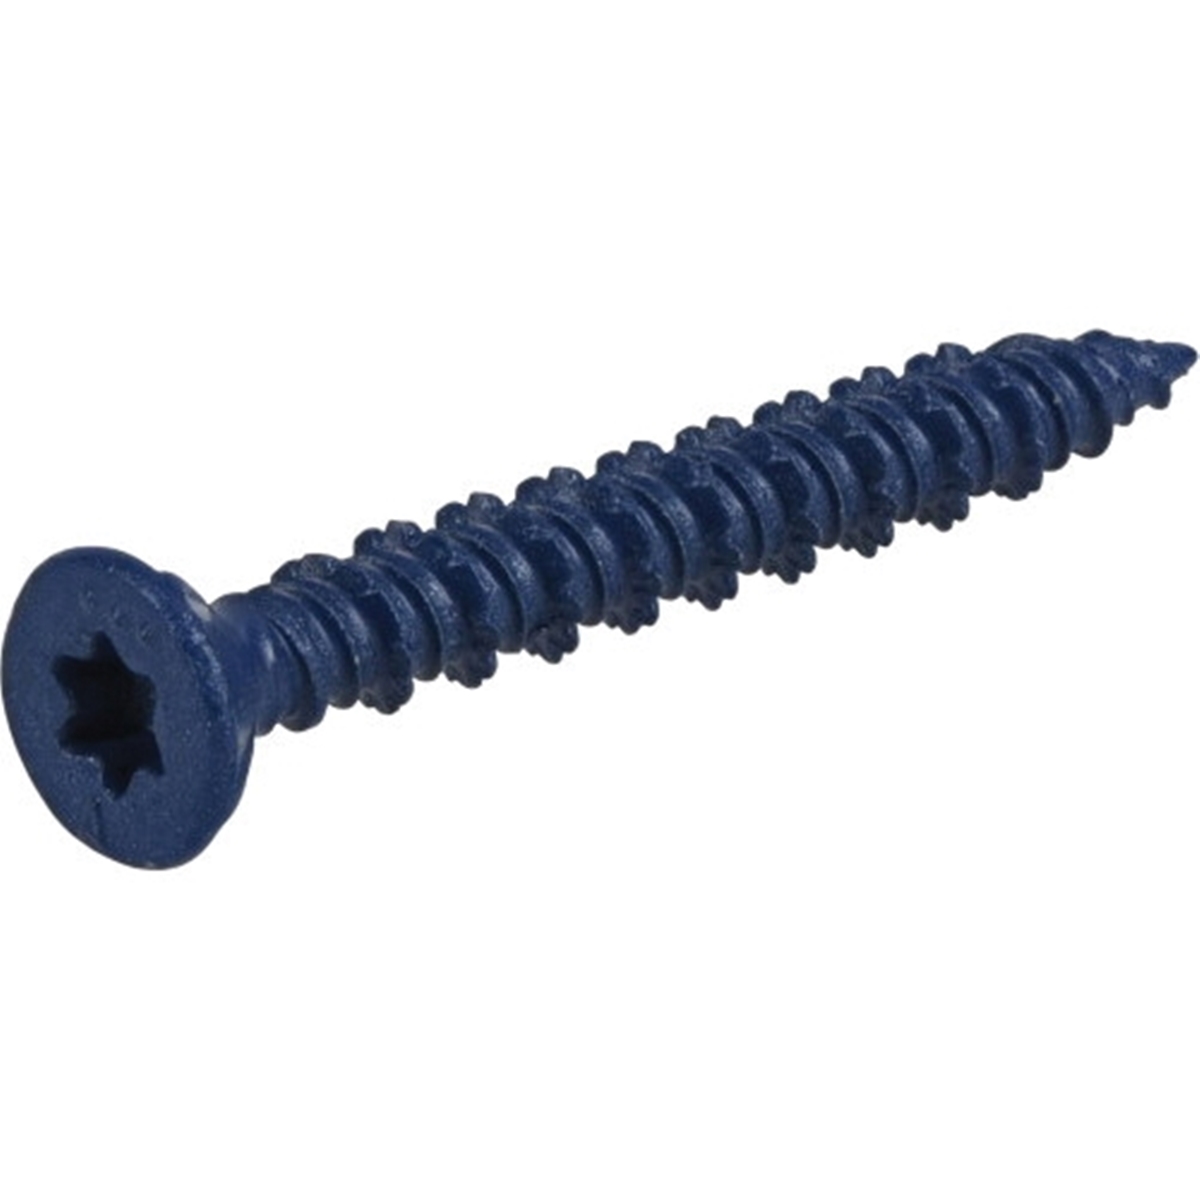 376523 Concrete Screw Anchor, 3/16 in Dia, 1-3/4 in L, Carbon Steel, Epoxy-Coated, 100/PK